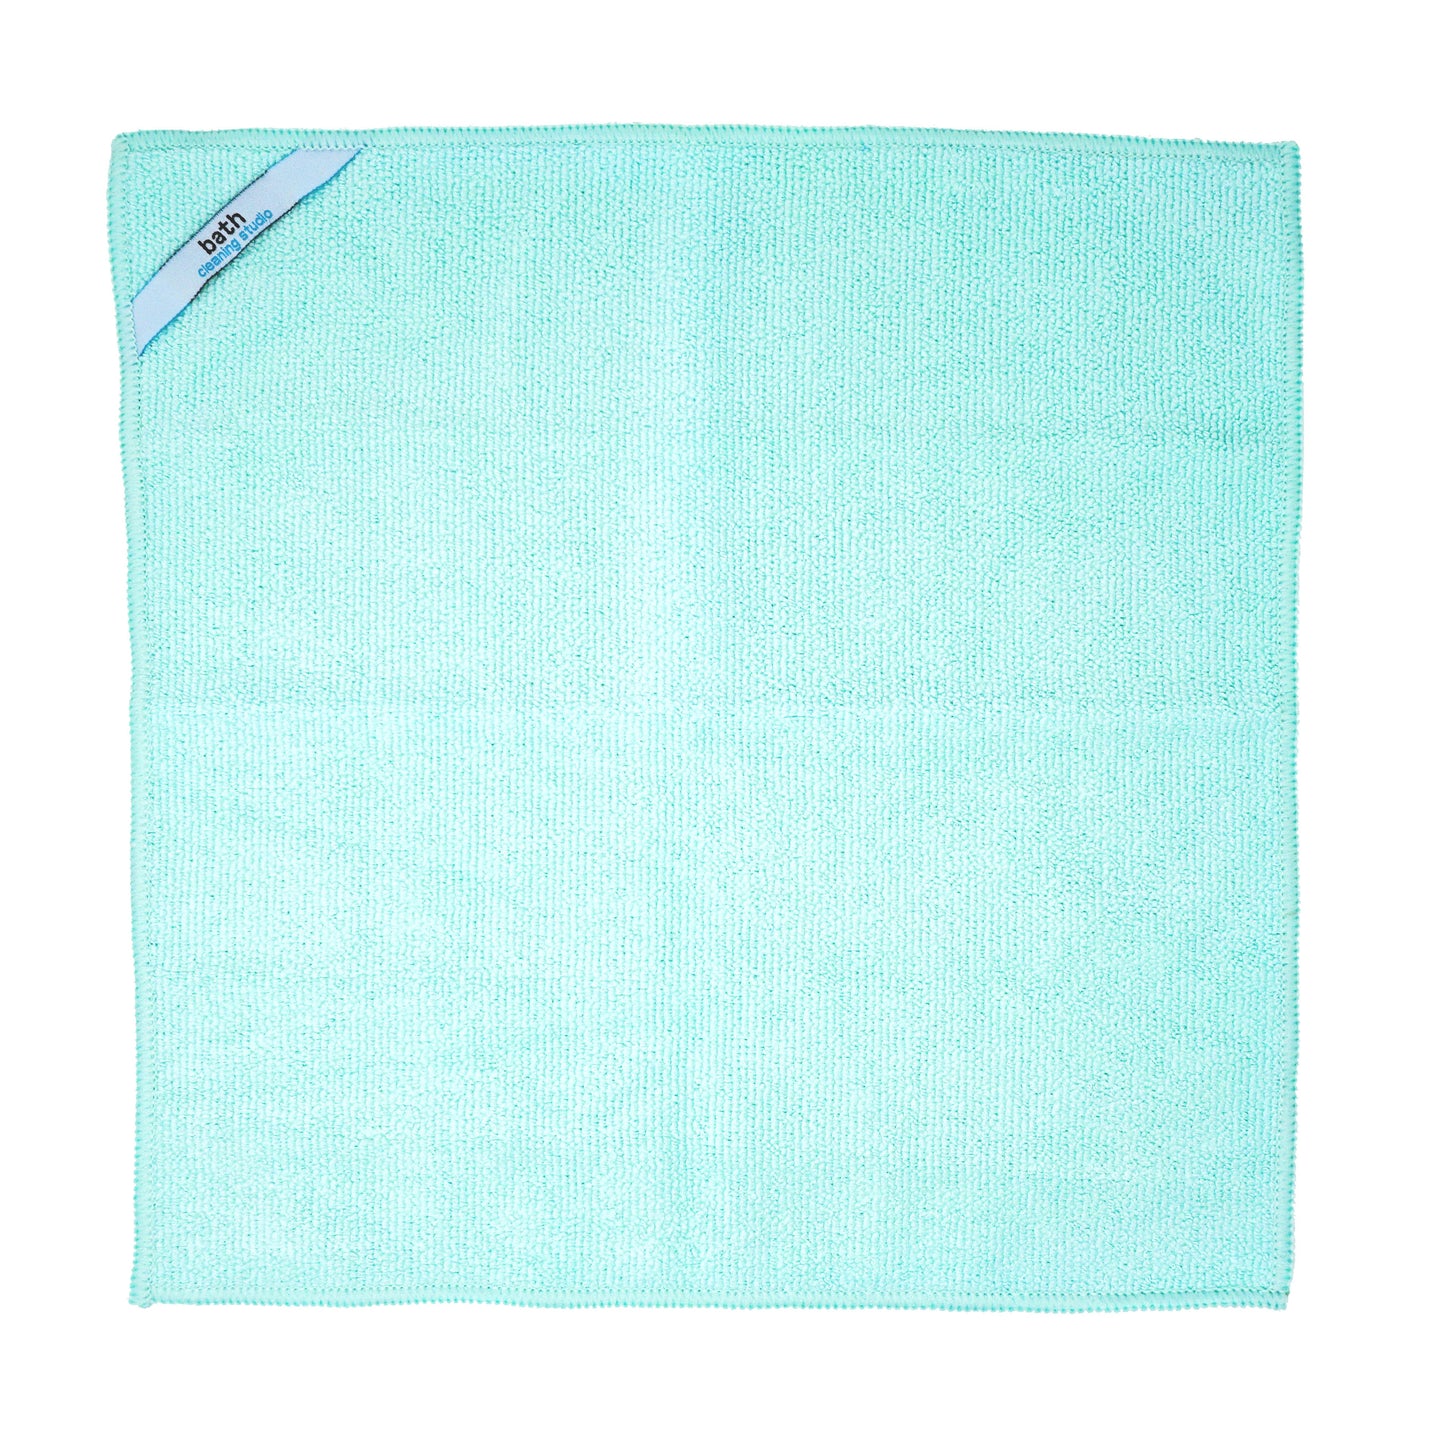 Microfiber Cleaning Cloth - Bath Kit (3-Pack) by Everneat